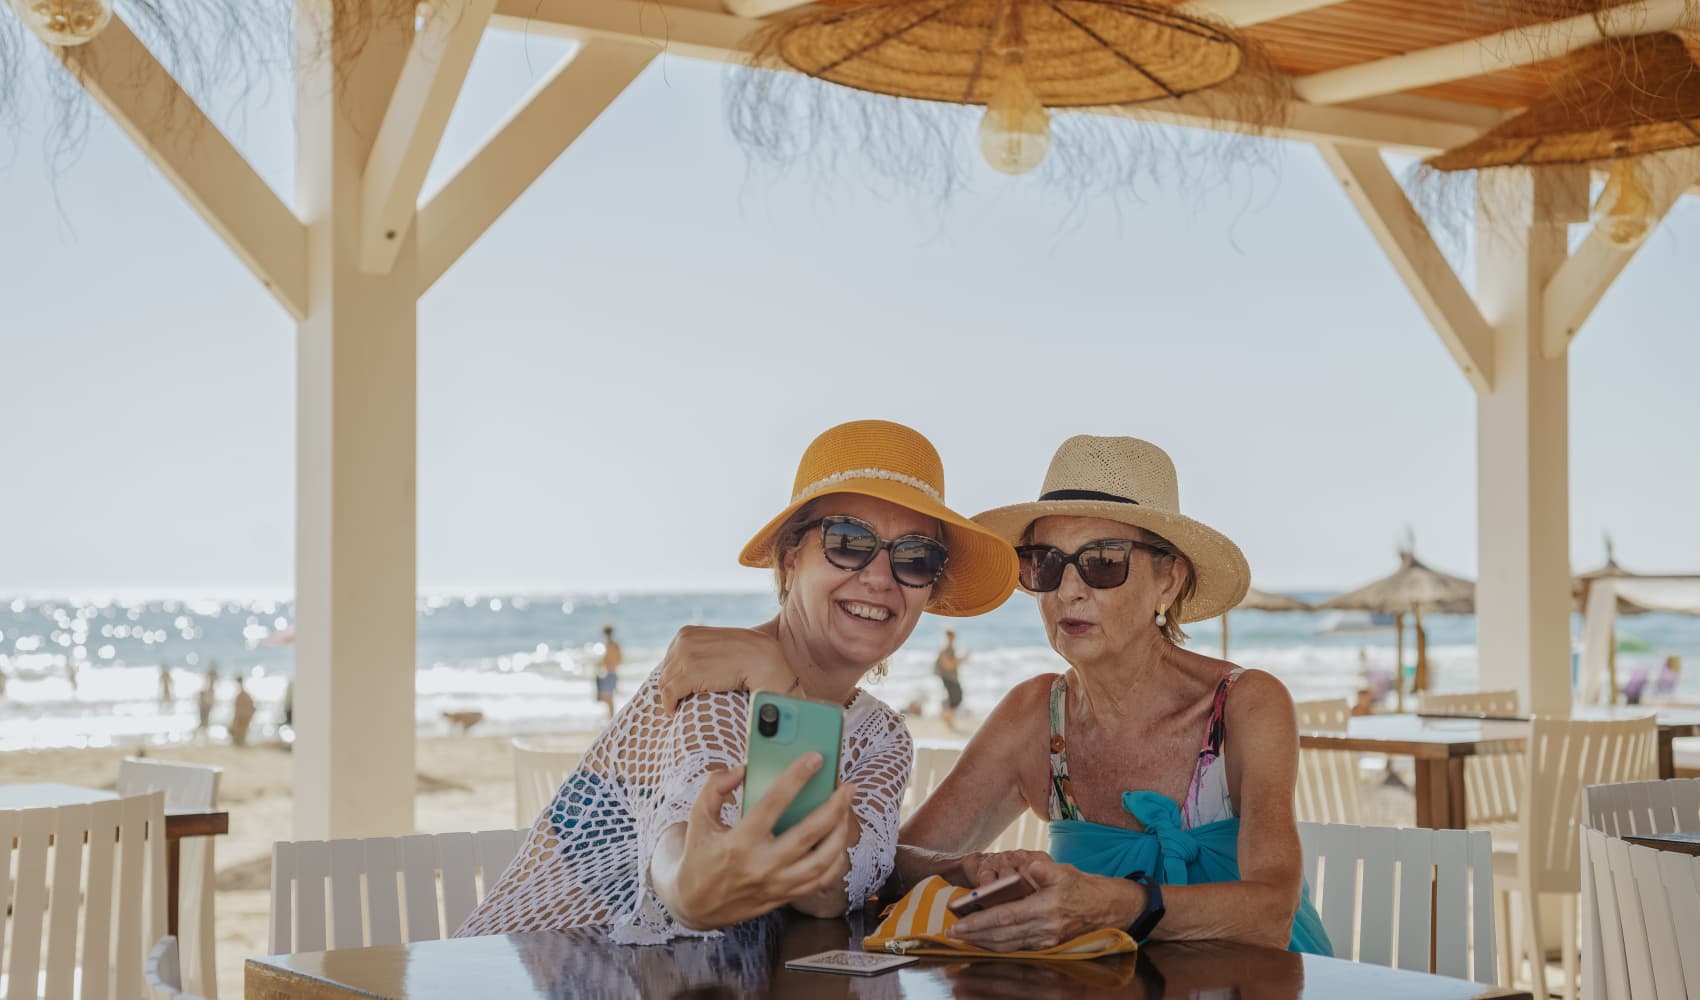 Women, part of the wave of baby boomers reaching ‘peak 65,' are more likely to struggle in retirement, research finds